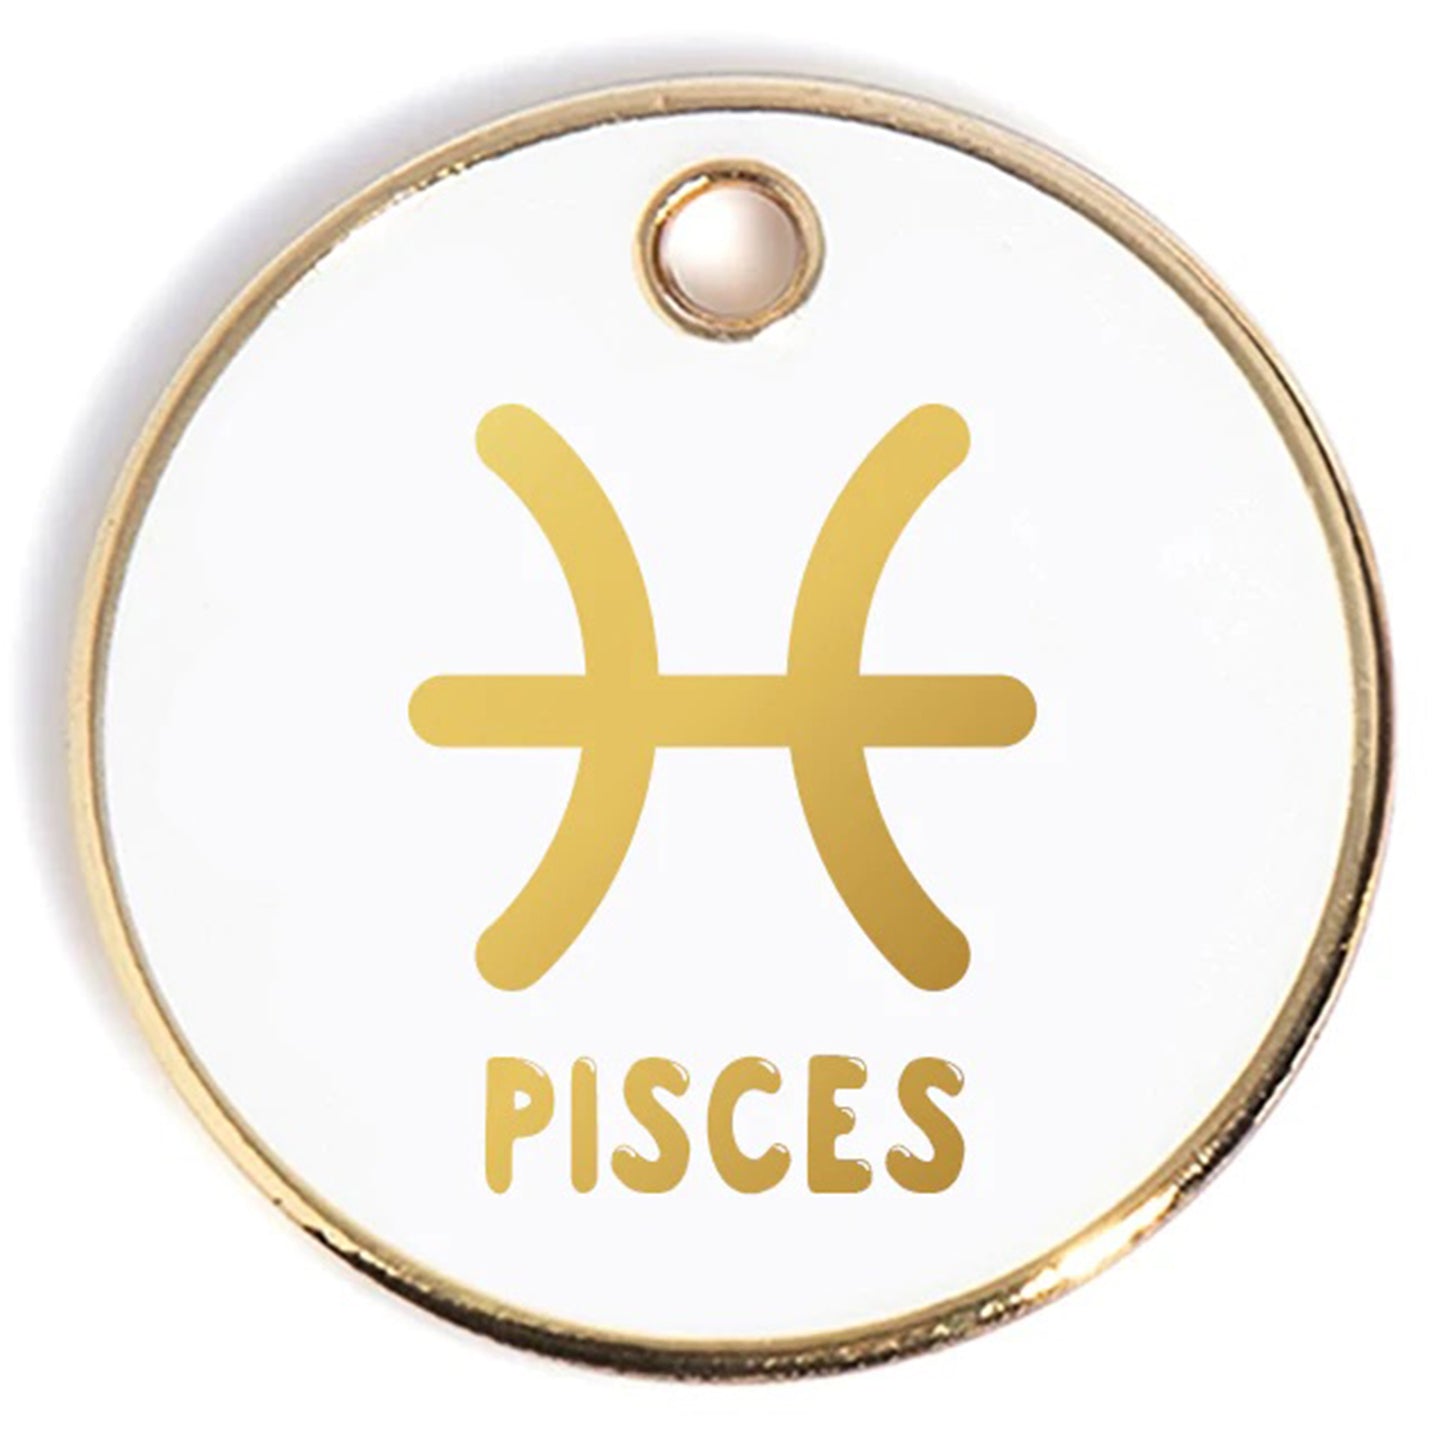 Pisces Tag - white and gold gold enamel pet id tag says pisces | trill paws